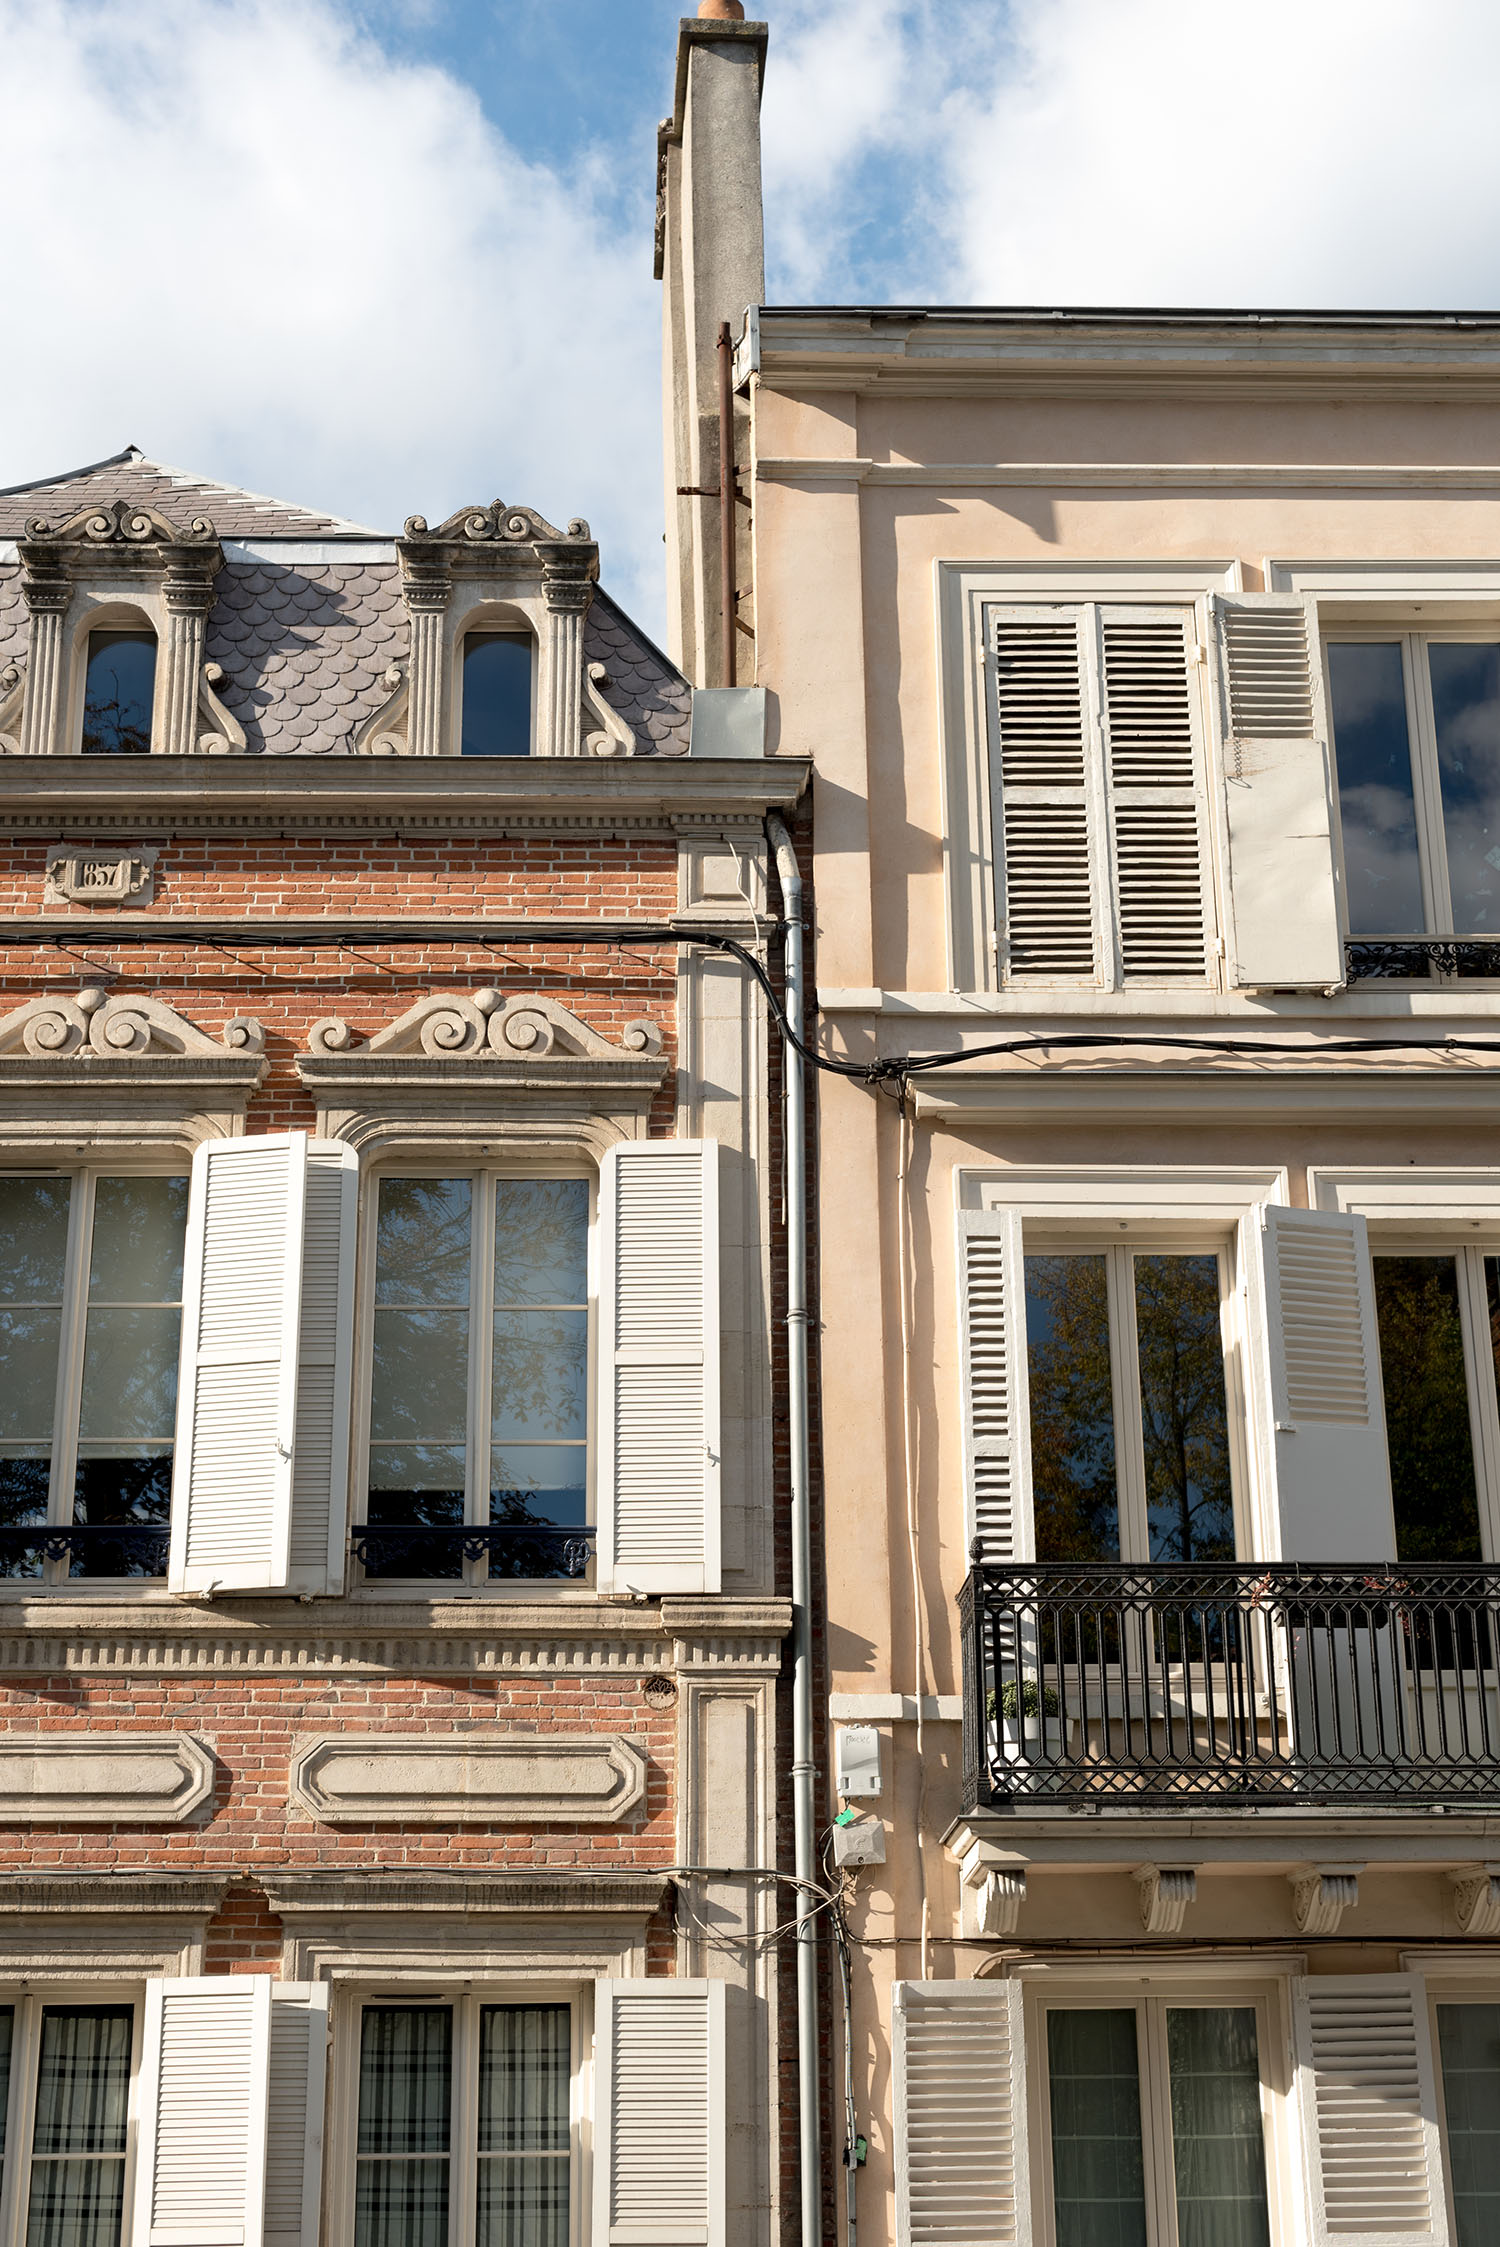 Coco & Vera - Rowhouses in Epernay, France